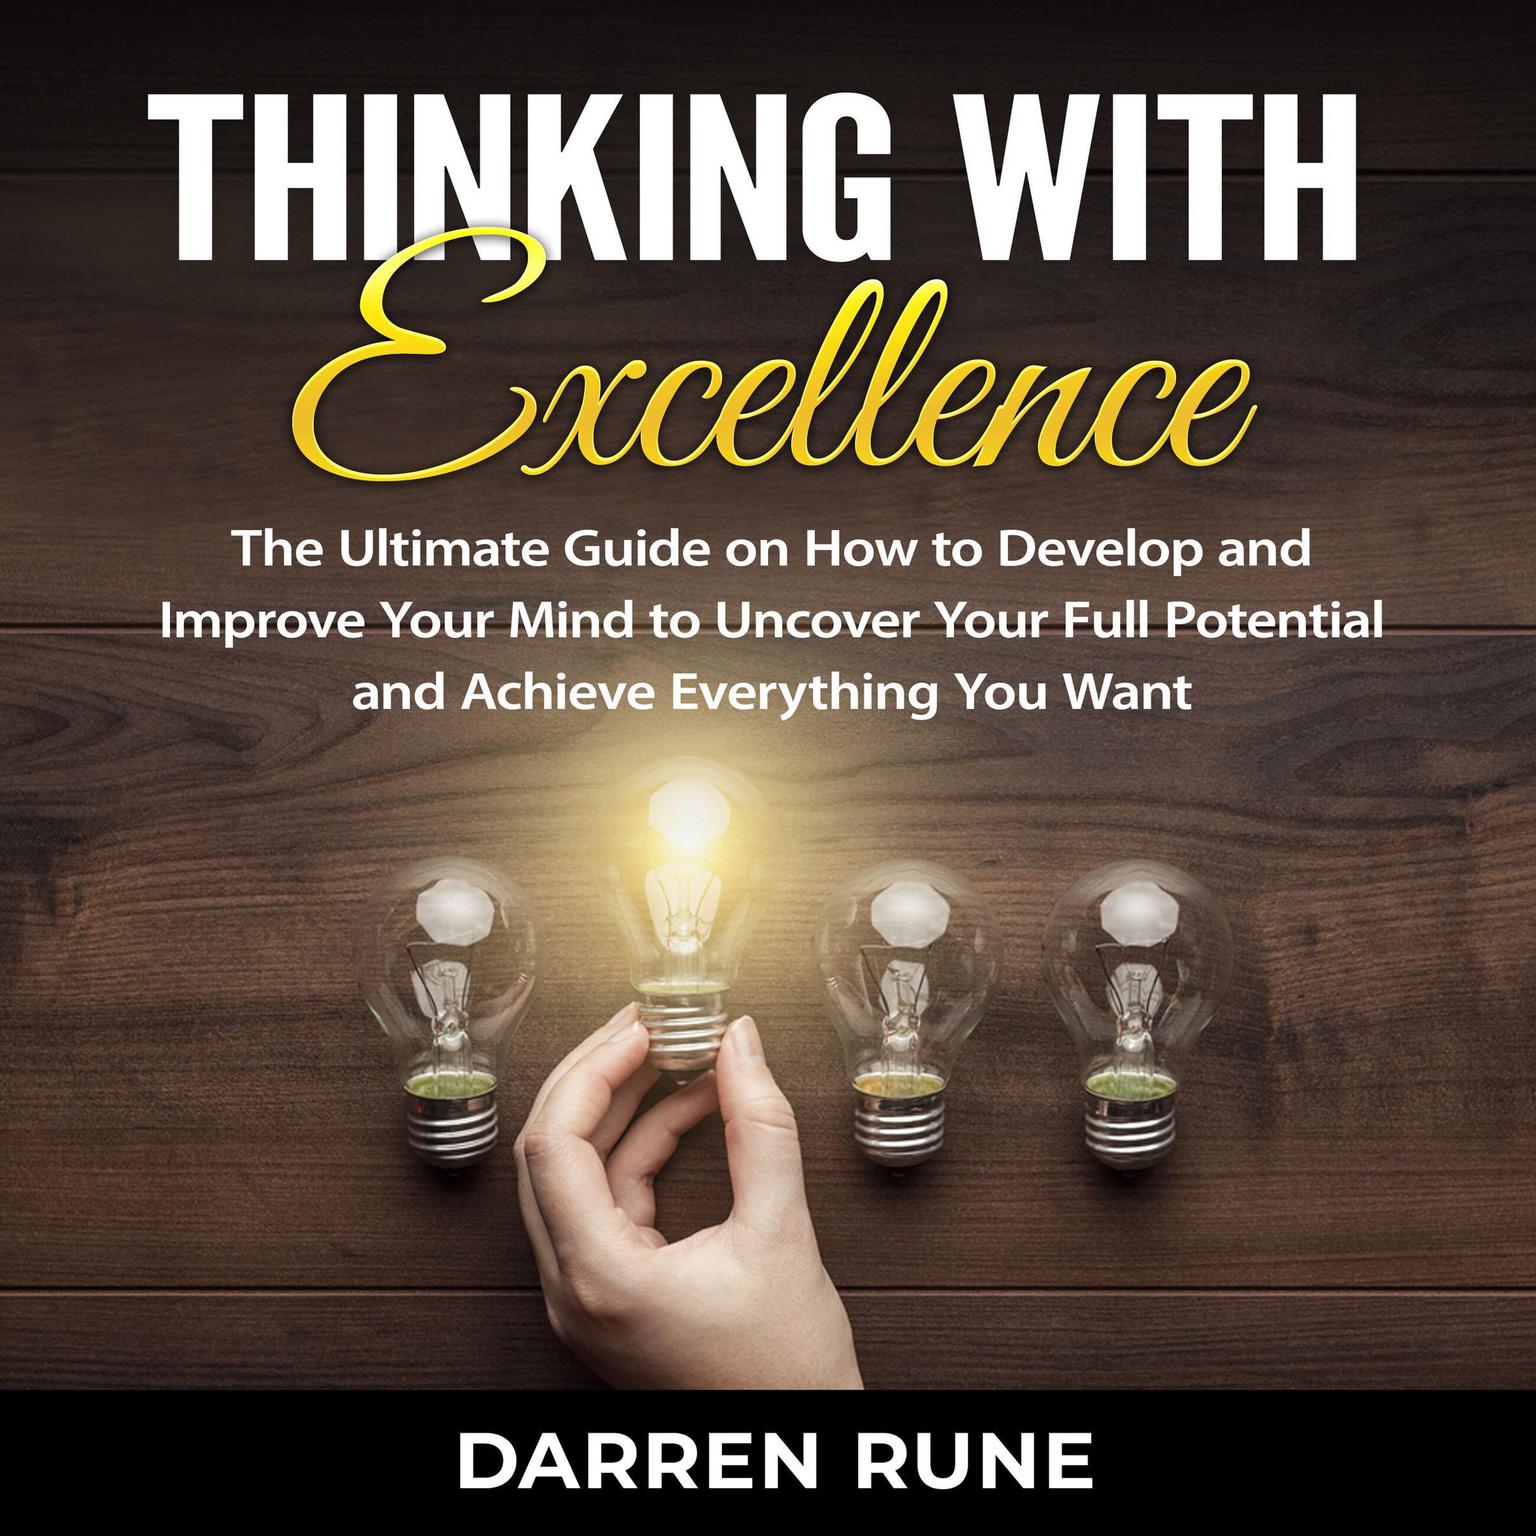 Thinking With Excellence: The Ultimate Guide on How to Develop and Improve Your Mind to Uncover Your Full Potential and Achieve Everything You Want Audiobook, by Darren Rune